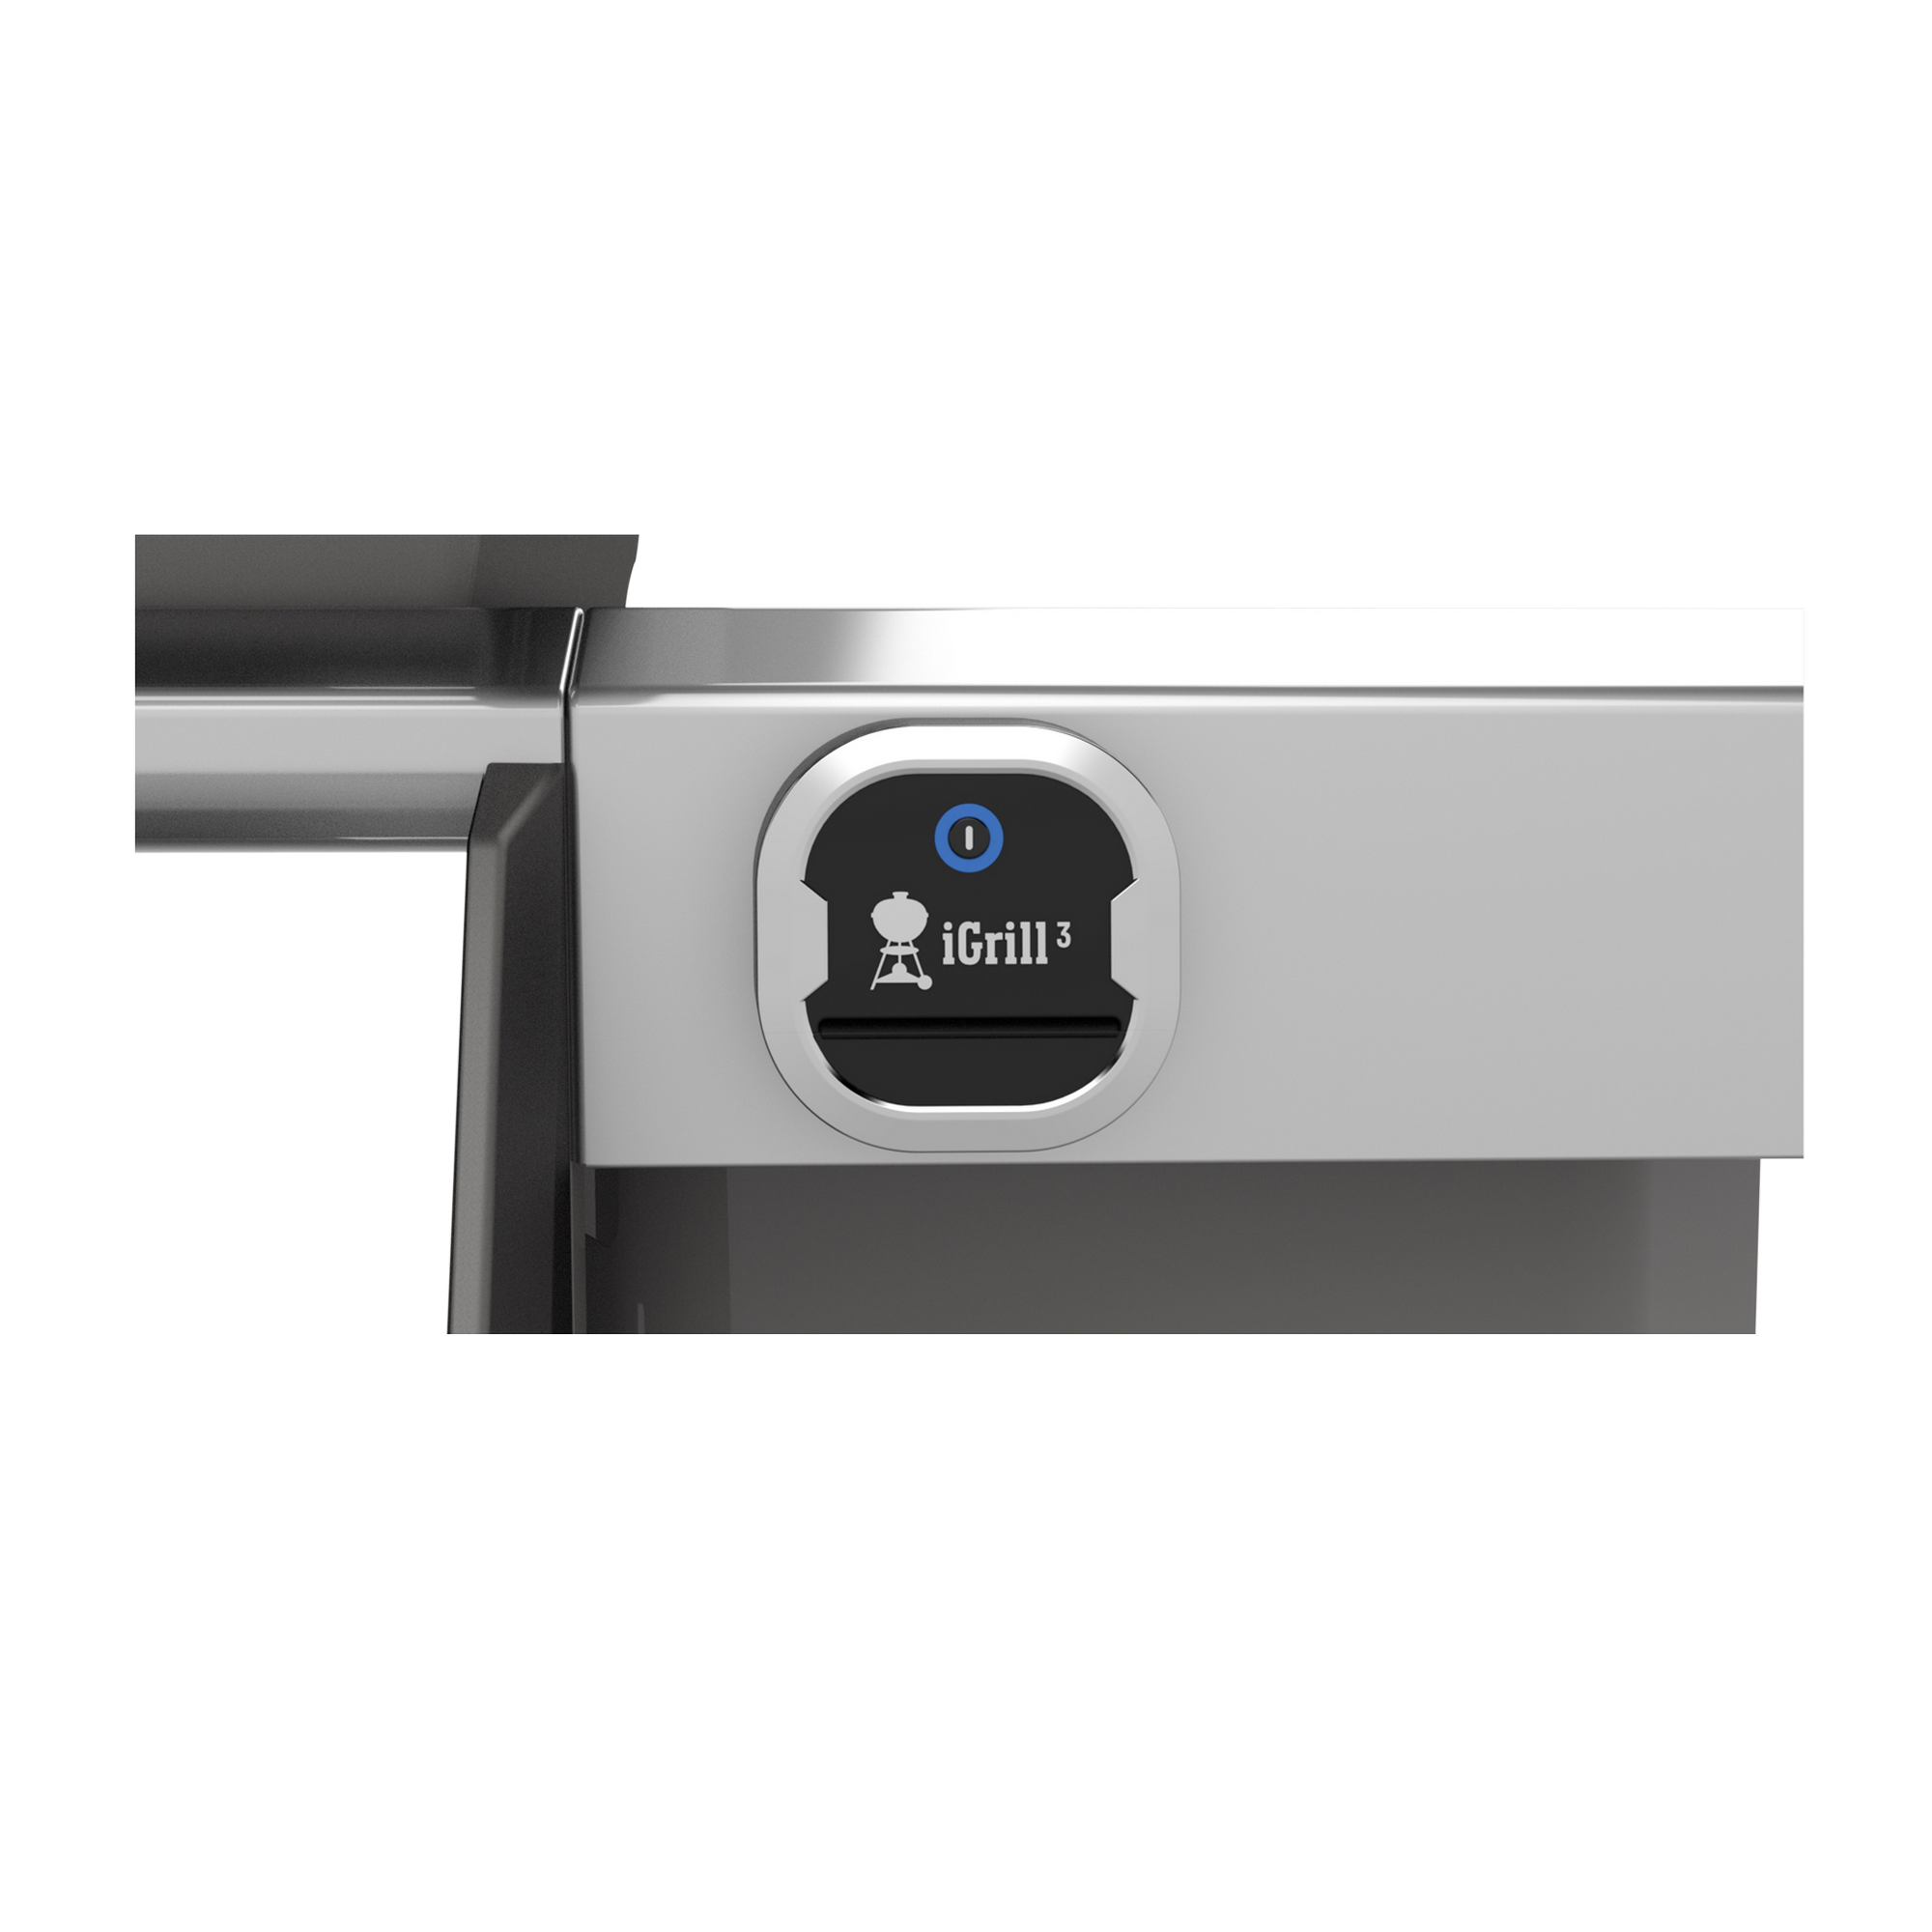 Grillthermometer 'iGrill 3' + product picture